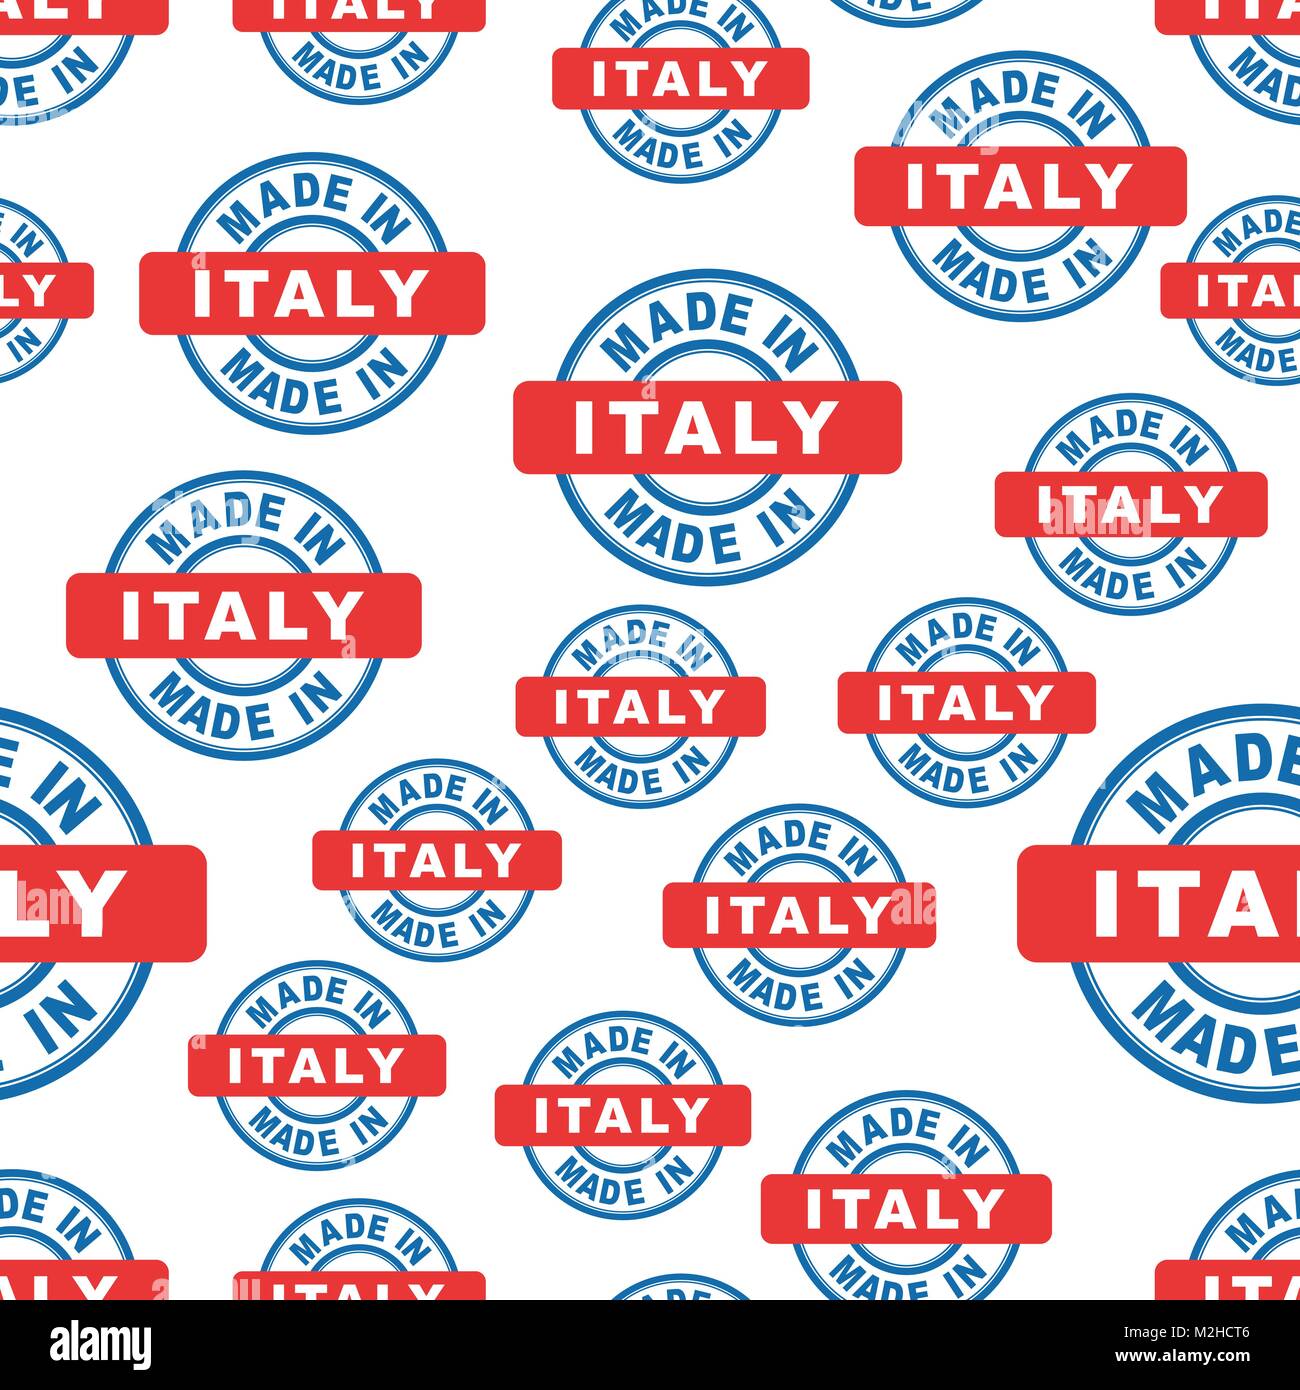 Made in Italy seamless pattern background icon. Flat vector illustration. Italy sign symbol pattern. Stock Vector